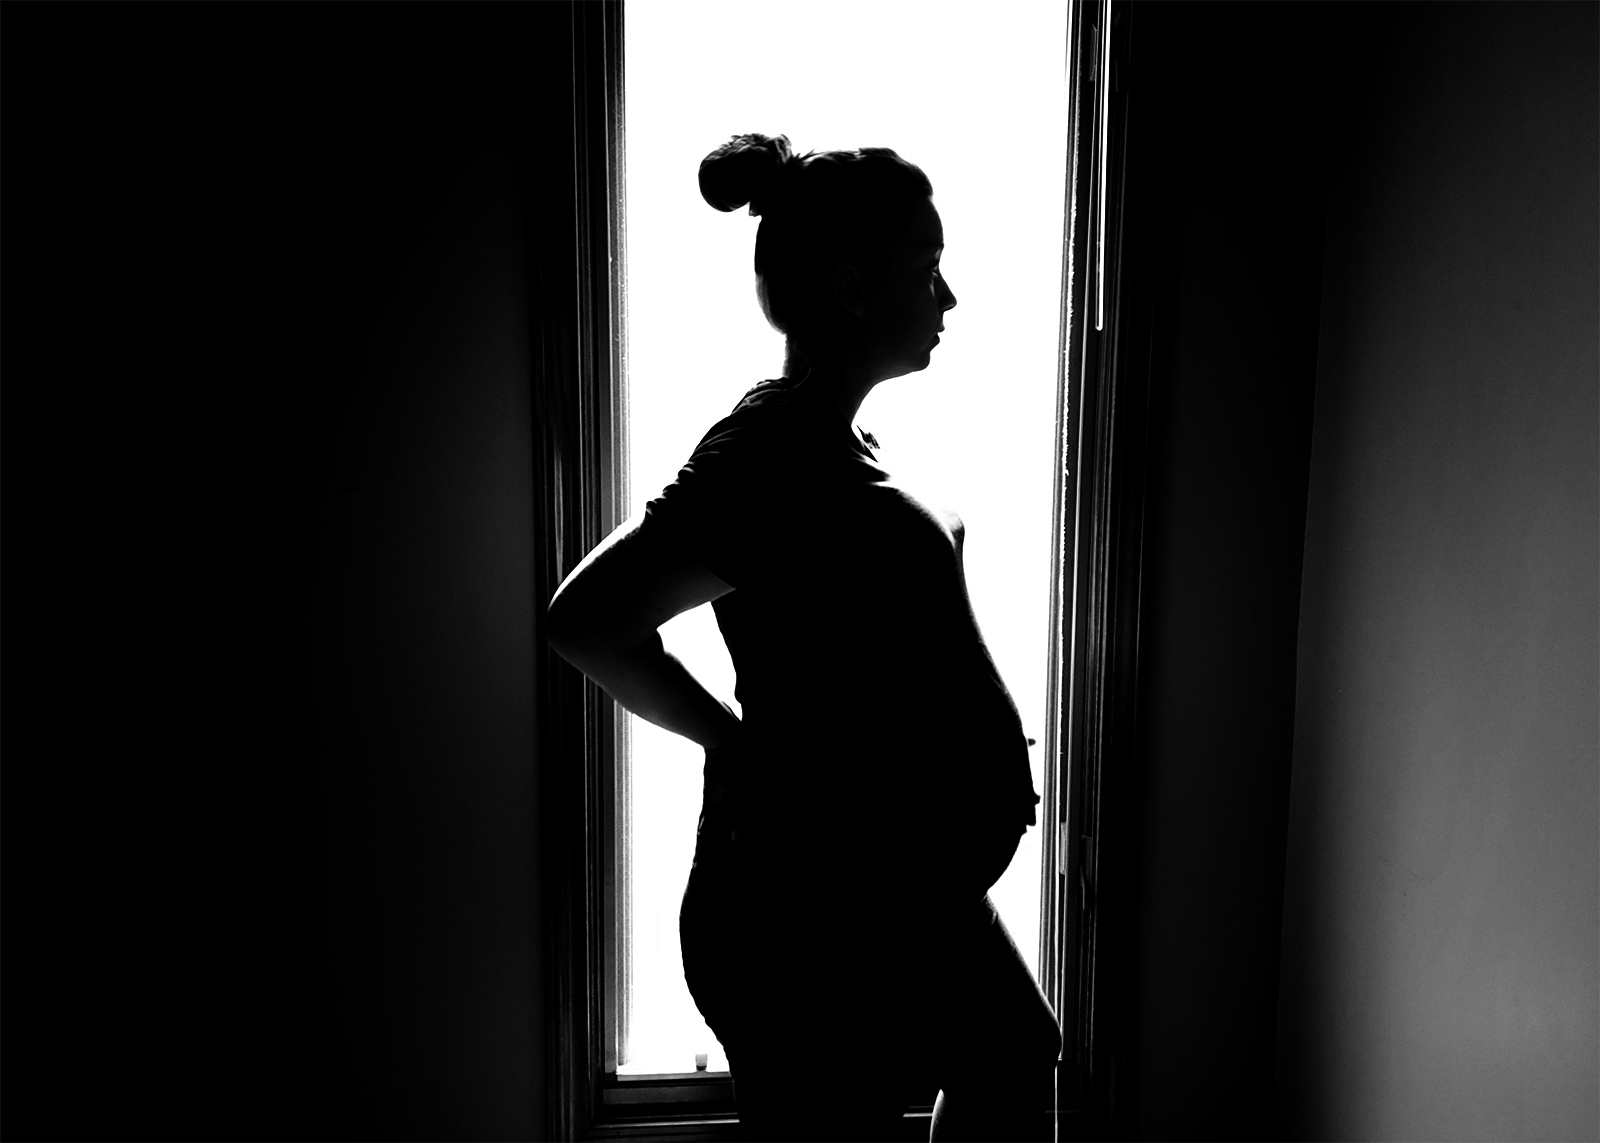 Pregnancy is a dangerous time for women in abusive relationships